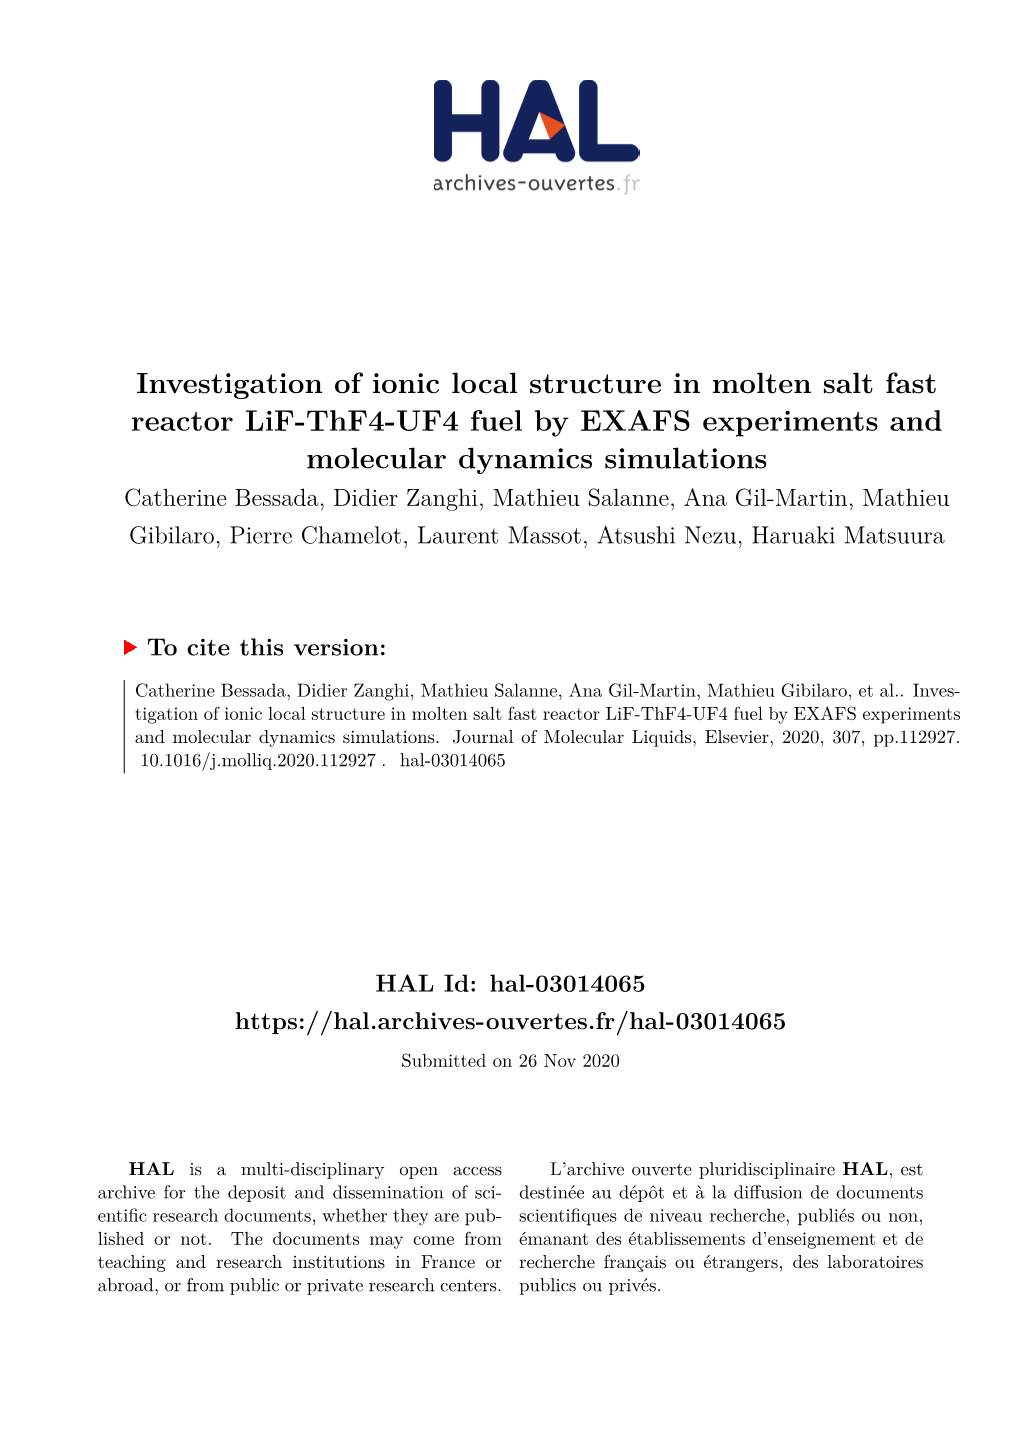 Investigation of Ionic Local Structure in Molten Salt Fast Reactor Lif-Thf4